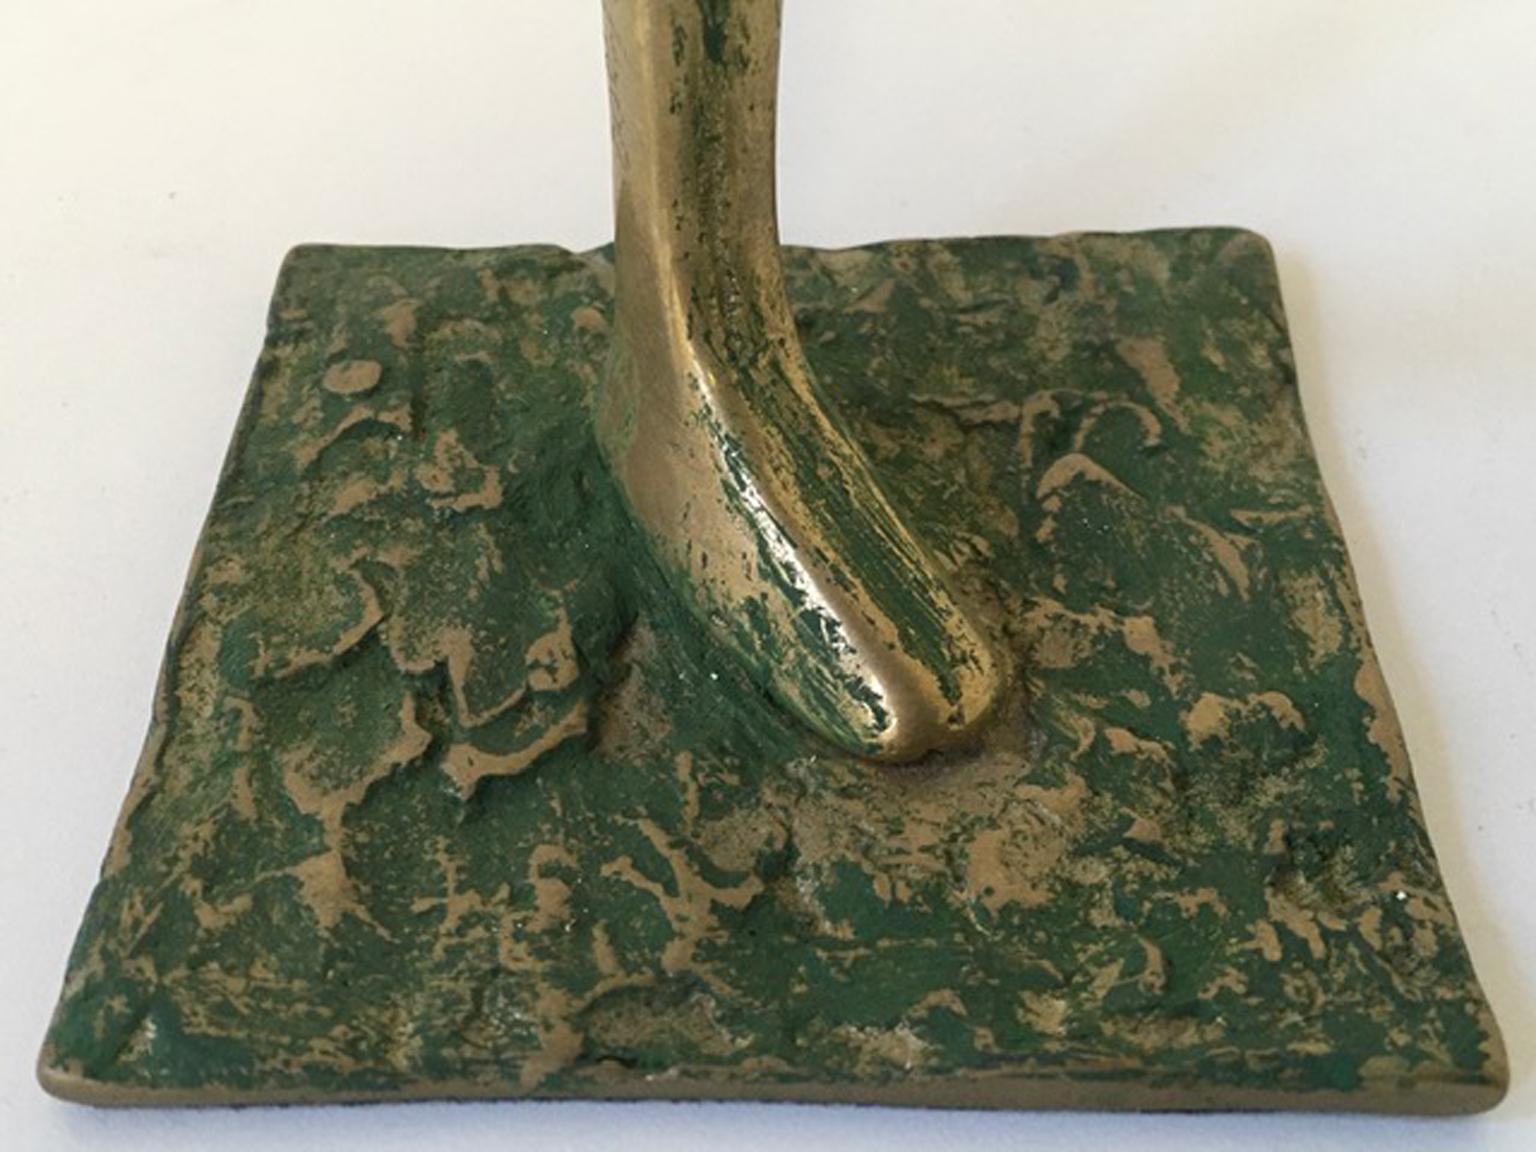 1980 Italy Post Modern Abstract Figurative Bronze Sculpture by Marisa Ruberti For Sale 4